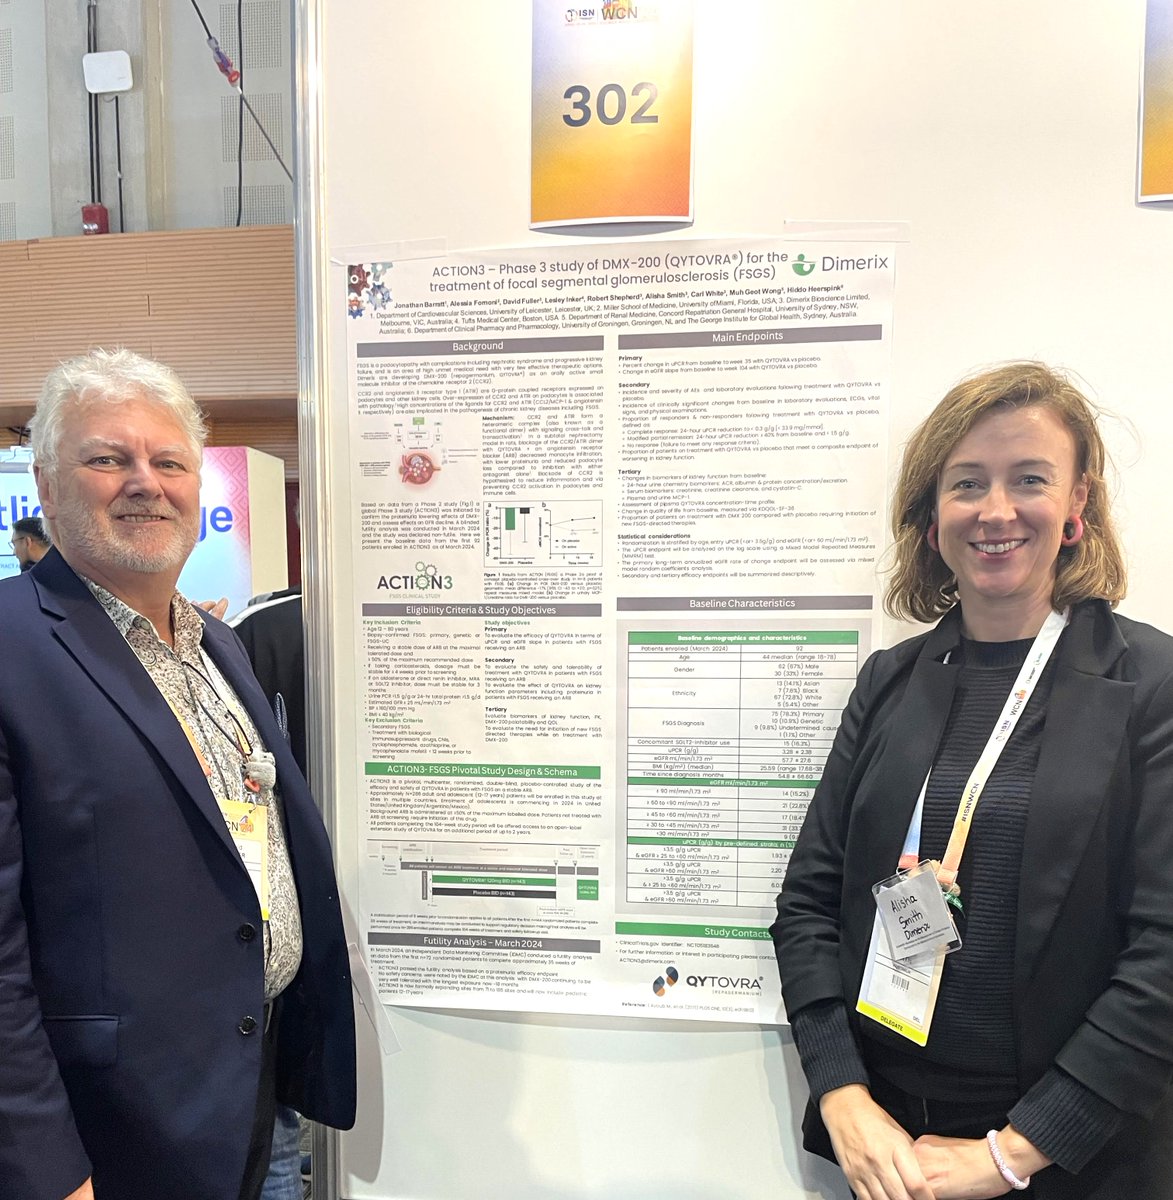 Dimerix clinical team presented yesterday at the World Congress of Nephrology in Buenos Aires alongside Medical Advisory Board and ACTION3 study investigators #WCN24